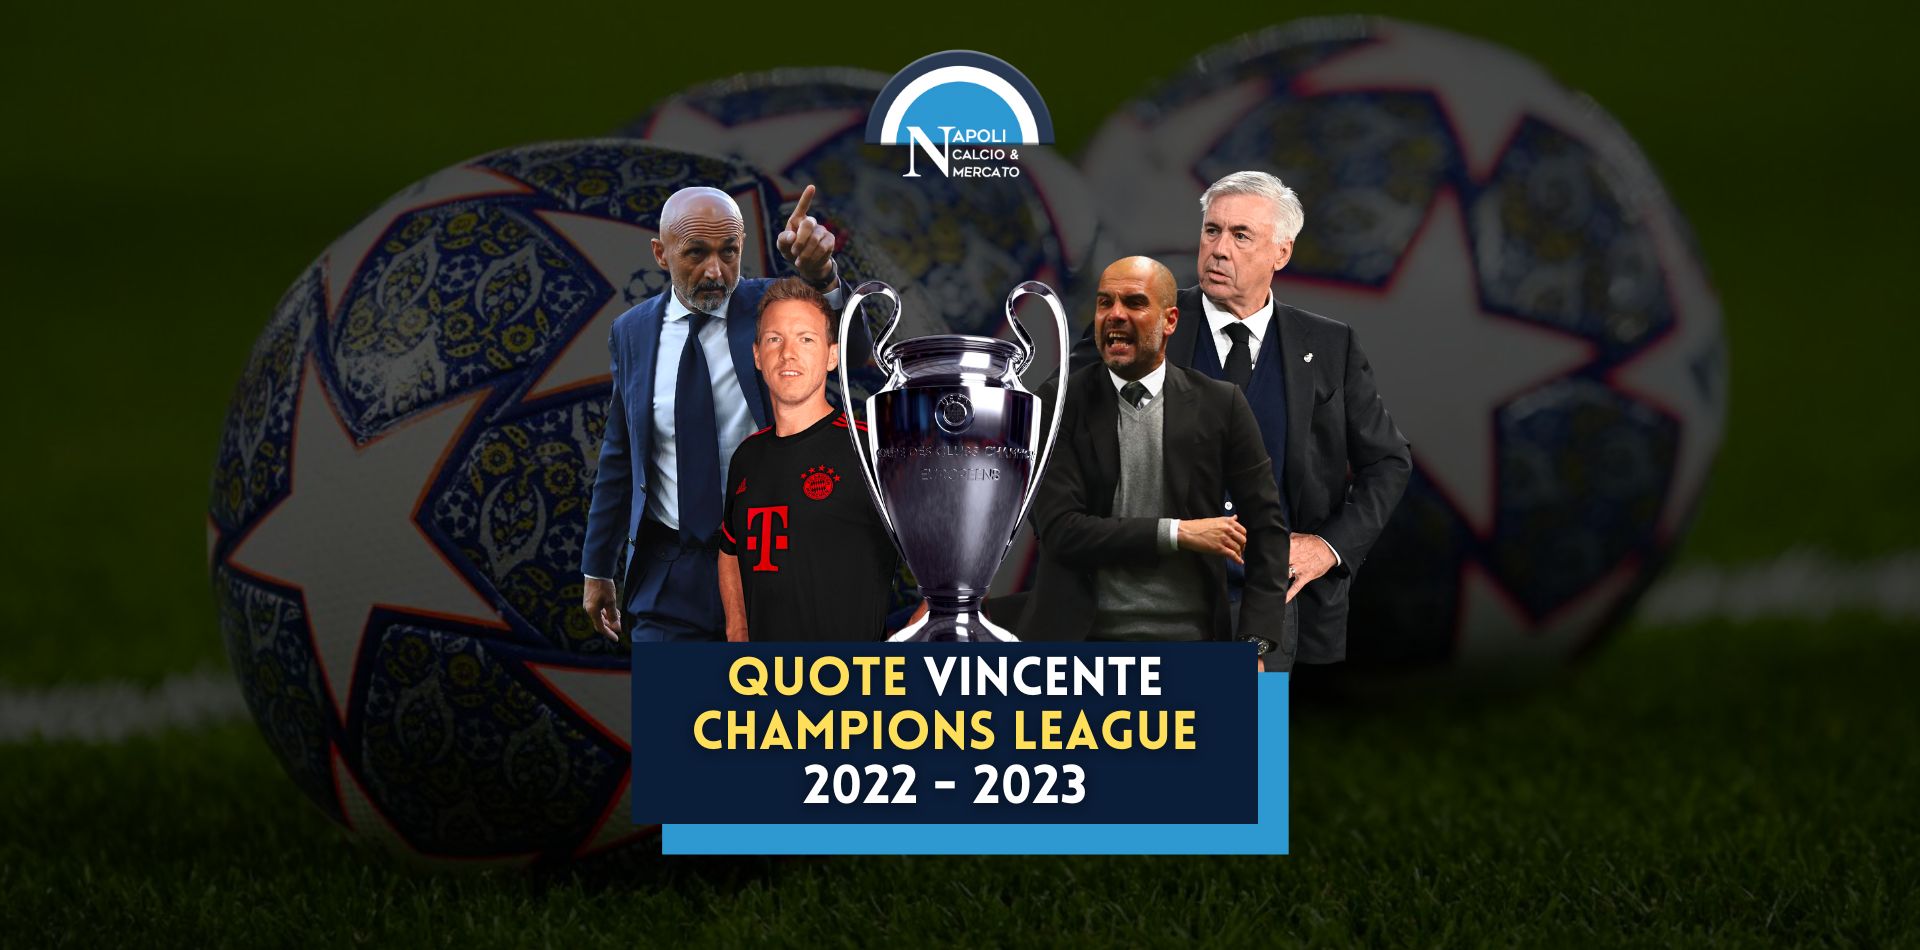 quote vincente champions league 2022 23 napoli manchester city bayern psg real madrid